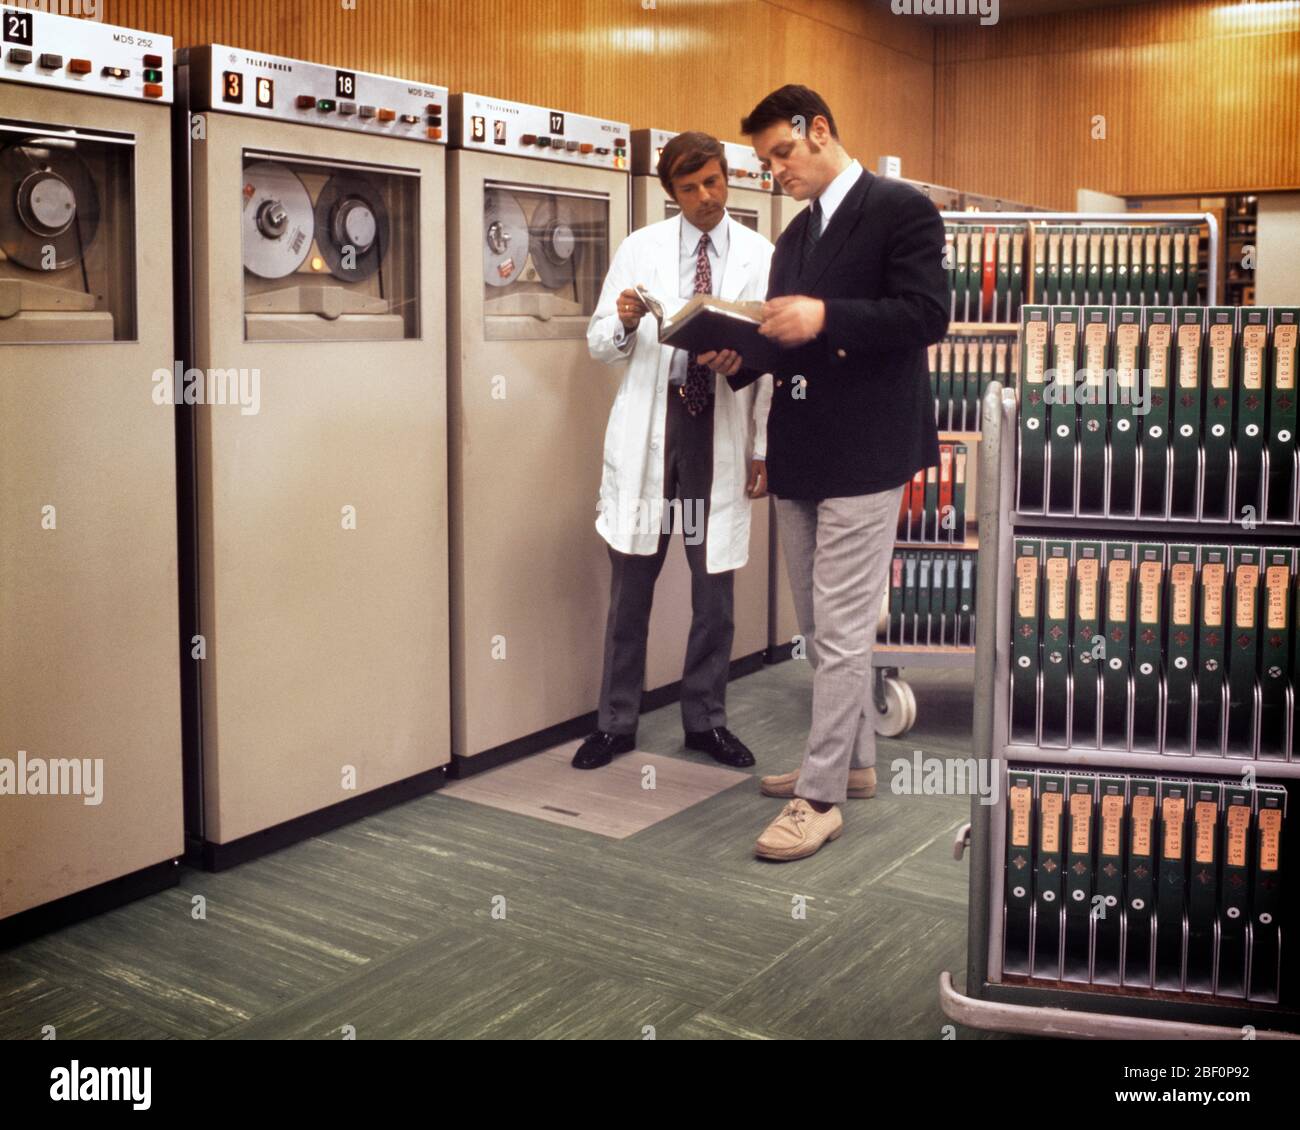 1980s TWO ANONYMOUS MEN MANAGER AND TECHNICIAN STANDING TOGETHER CHECKING A MANUAL BESIDE COMPUTER MAINFRAME TAPE STORAGE SILOS - ko1761 PHT001 HARS INFORMATION STORAGE REVOLUTION CHECKING LIFESTYLE HISTORY JOBS MANAGER COPY SPACE FULL-LENGTH PERSONS TECHNICIAN MALES EXECUTIVES DATA SUCCESS SKILL OCCUPATION SKILLS MAINFRAME MANUAL AND NETWORKING KNOWLEDGE LEADERSHIP PROGRESS INNOVATION A AUTHORITY OCCUPATIONS SILOS HIGH TECH BOSSES CONCEPTUAL BESIDE SUPPORT FACILITY ANONYMOUS COOPERATION IDEAS MANAGERS MID-ADULT MID-ADULT MAN PRECISION REEL TO REEL SOLUTIONS TECHNICAL CAUCASIAN ETHNICITY Stock Photo